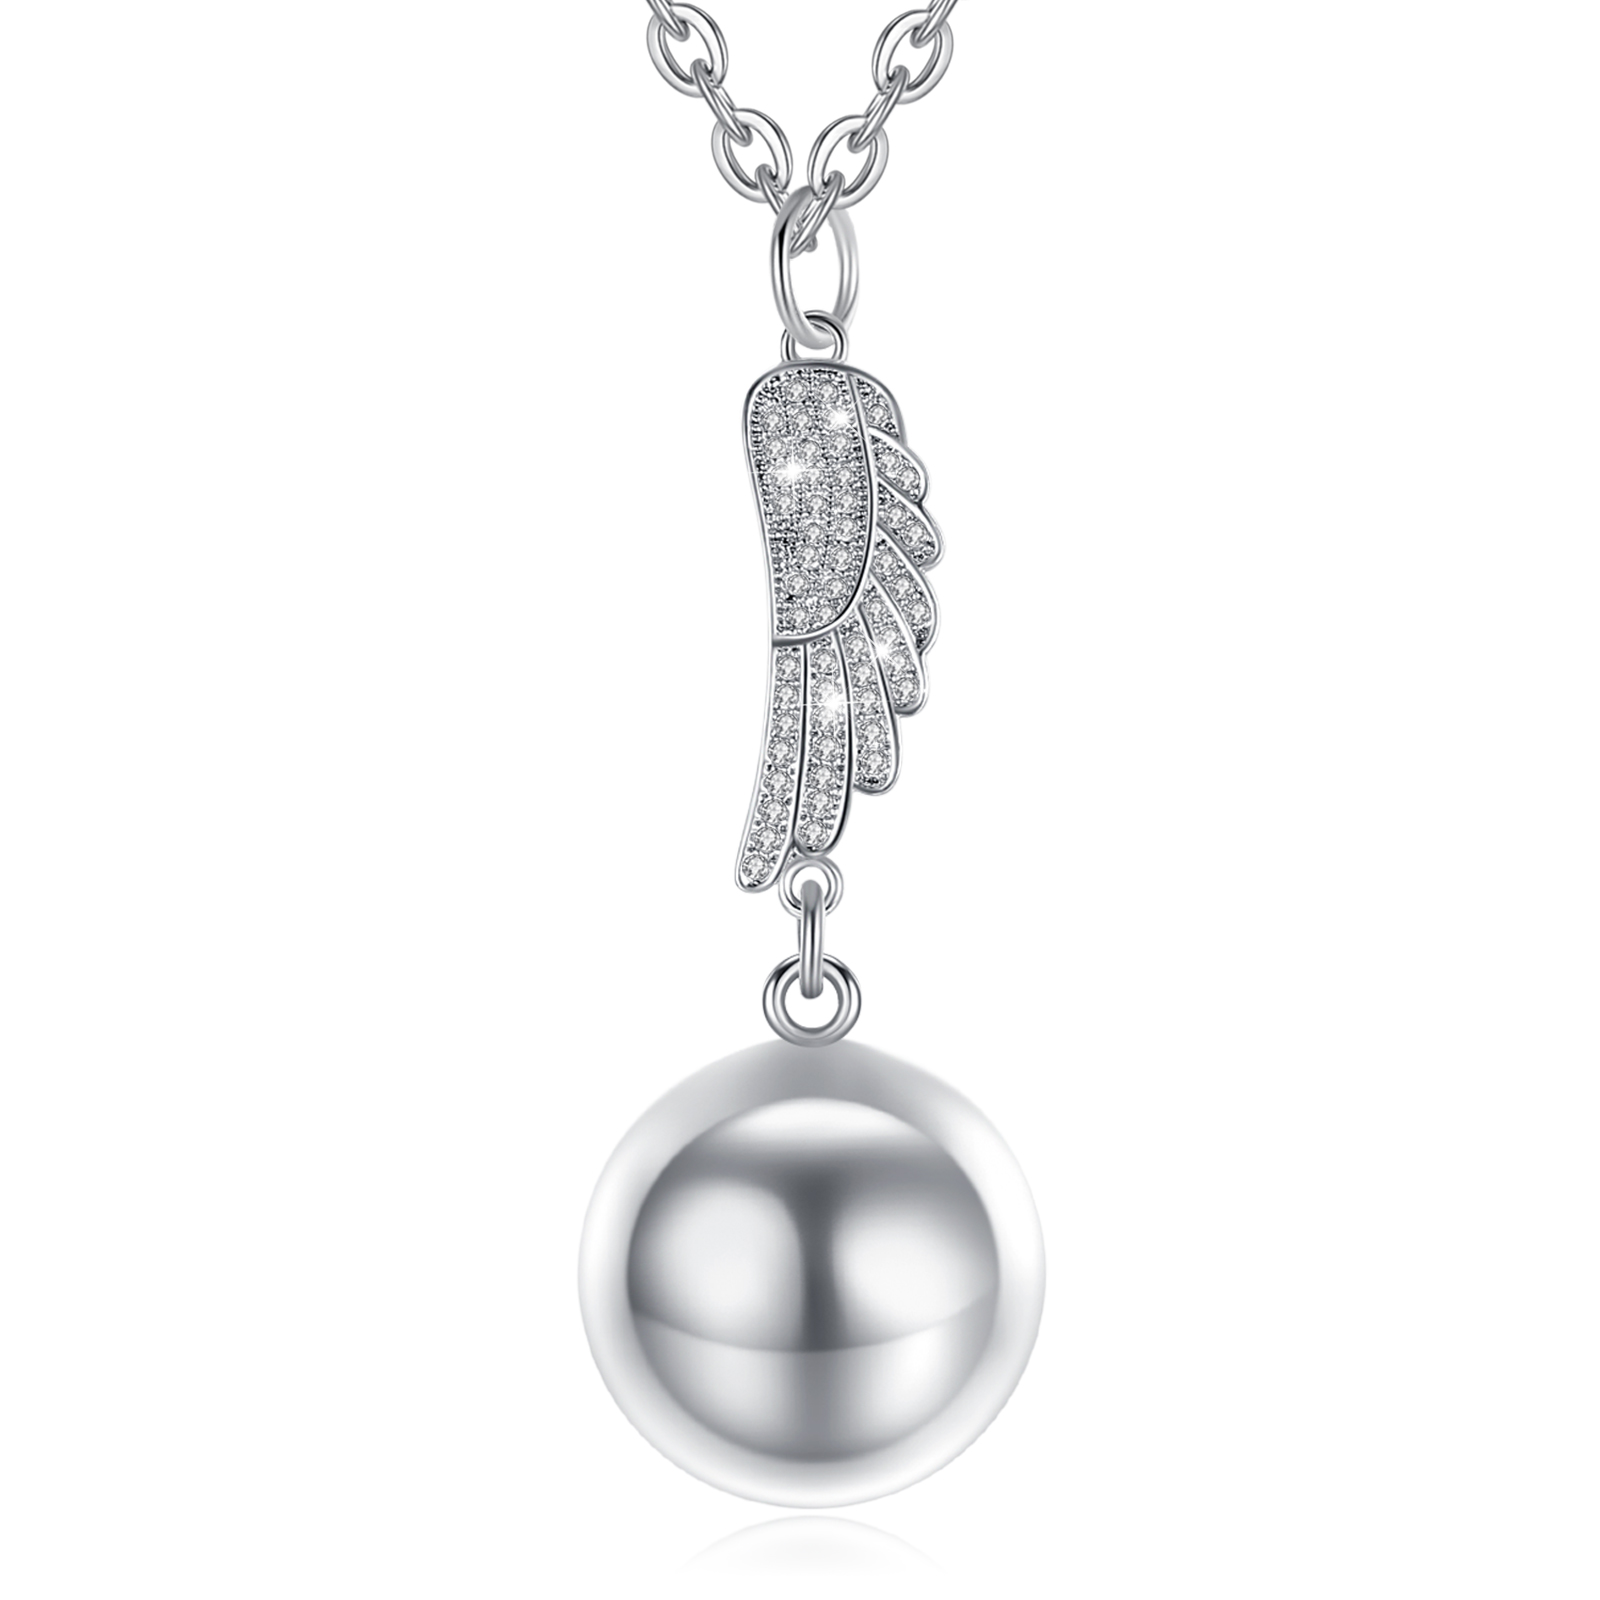 Merryshine OEM Pregnancy Jewelry Wholesale Chime Ball Necklace with Wing